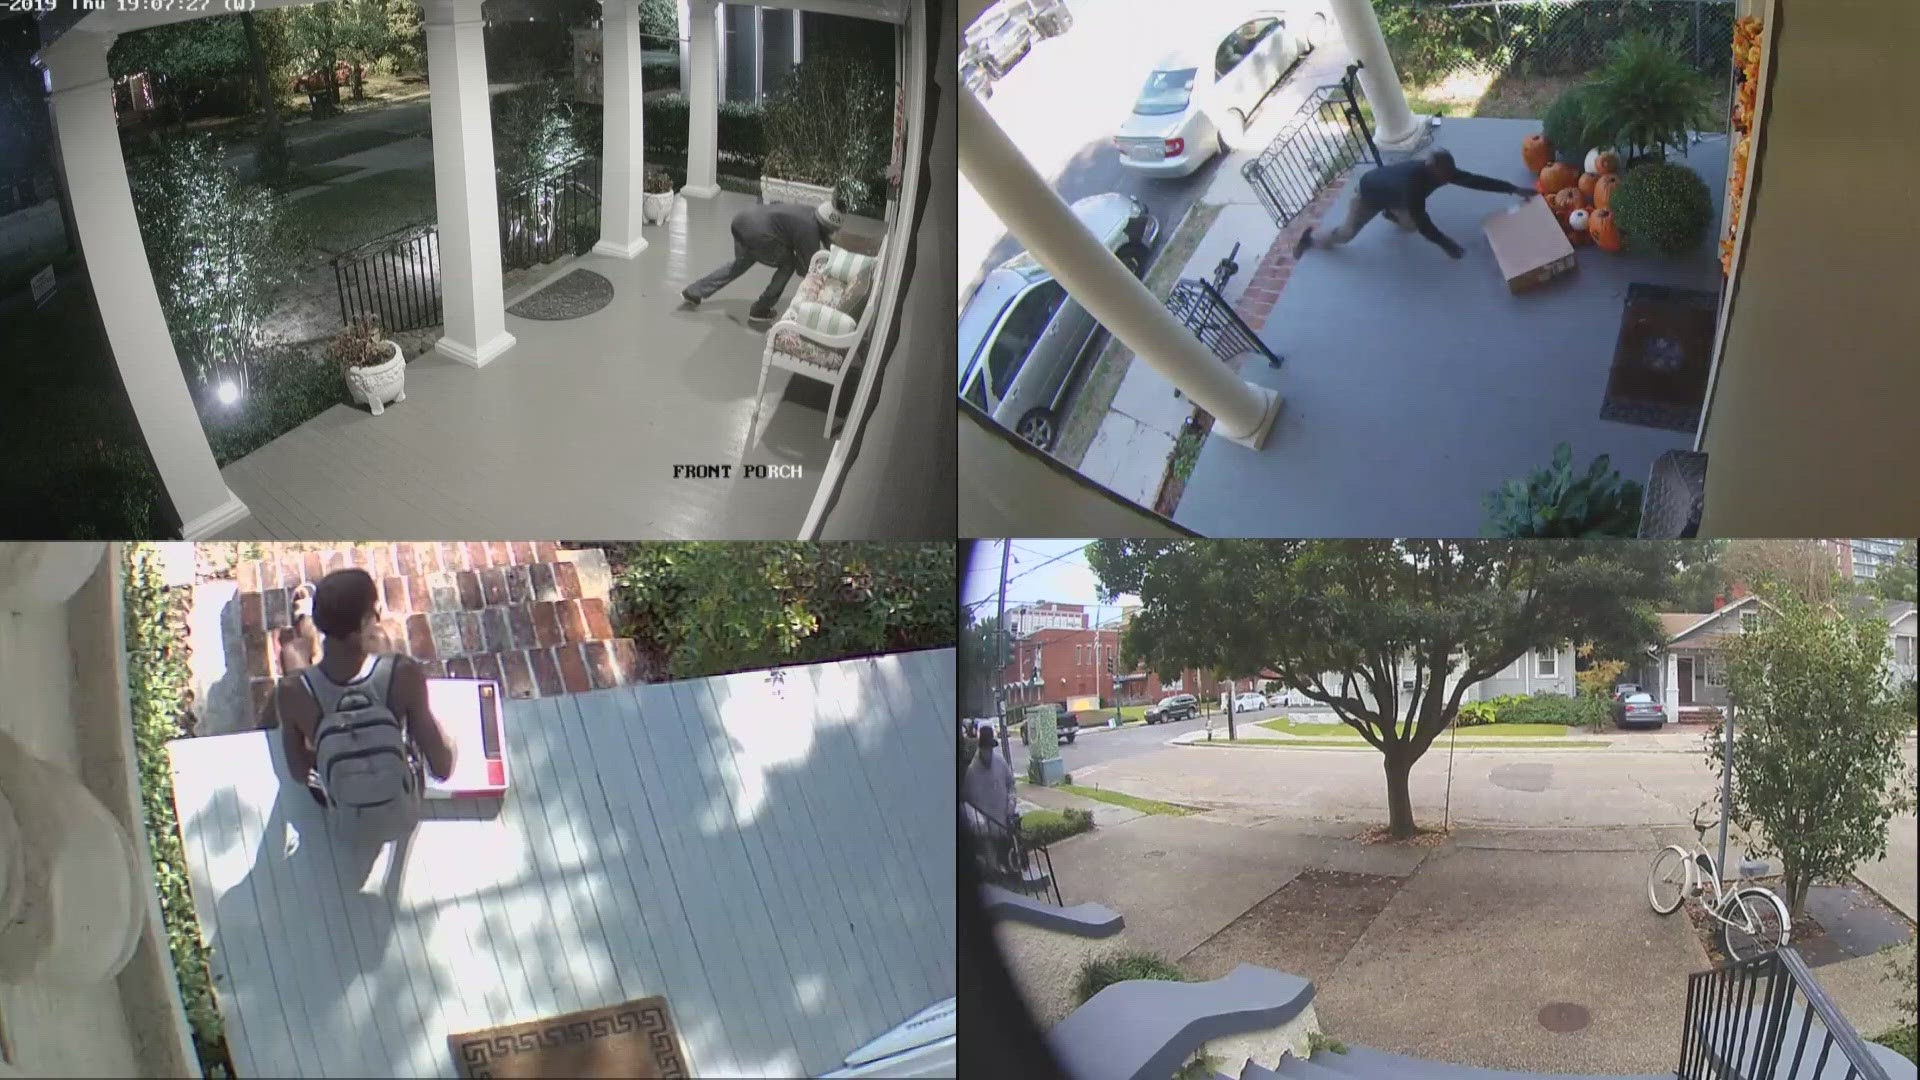 Porch pirates seem to be out in force as package deliveries jump during the holiday season.